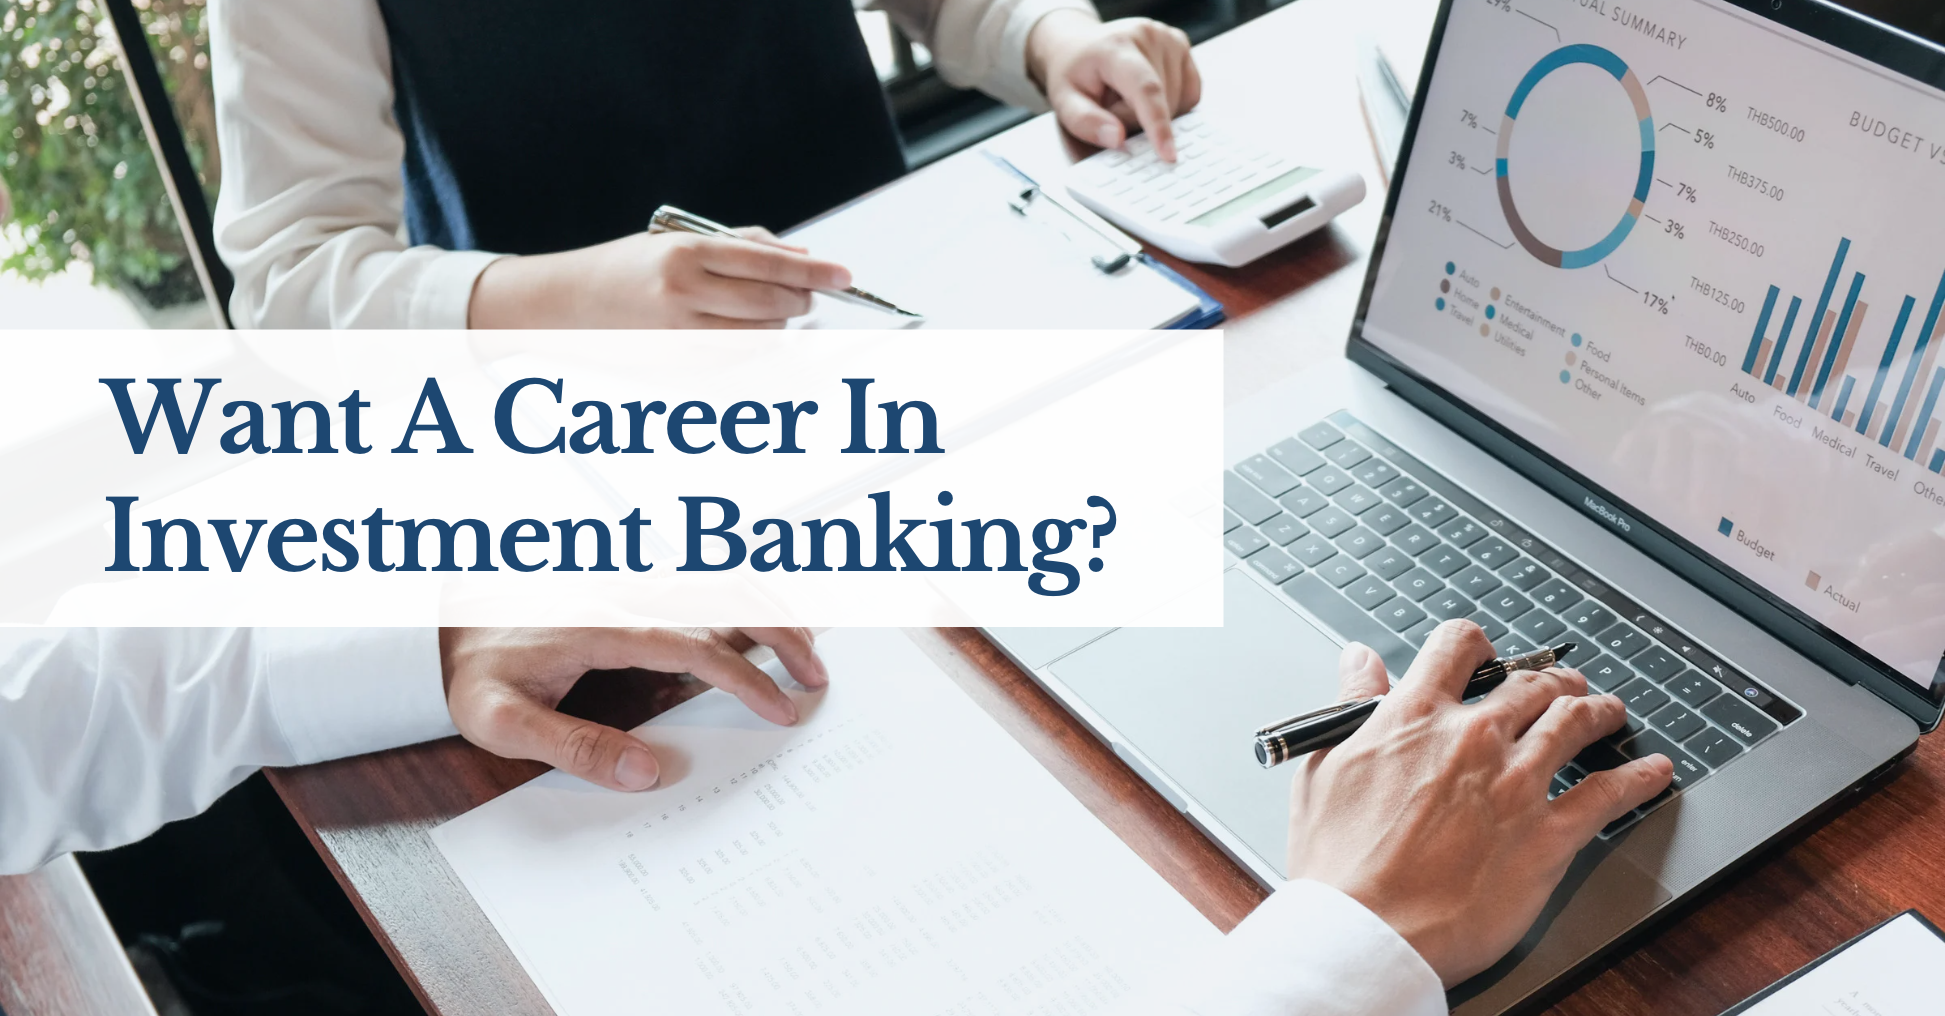 Want A Career In Investment Banking?